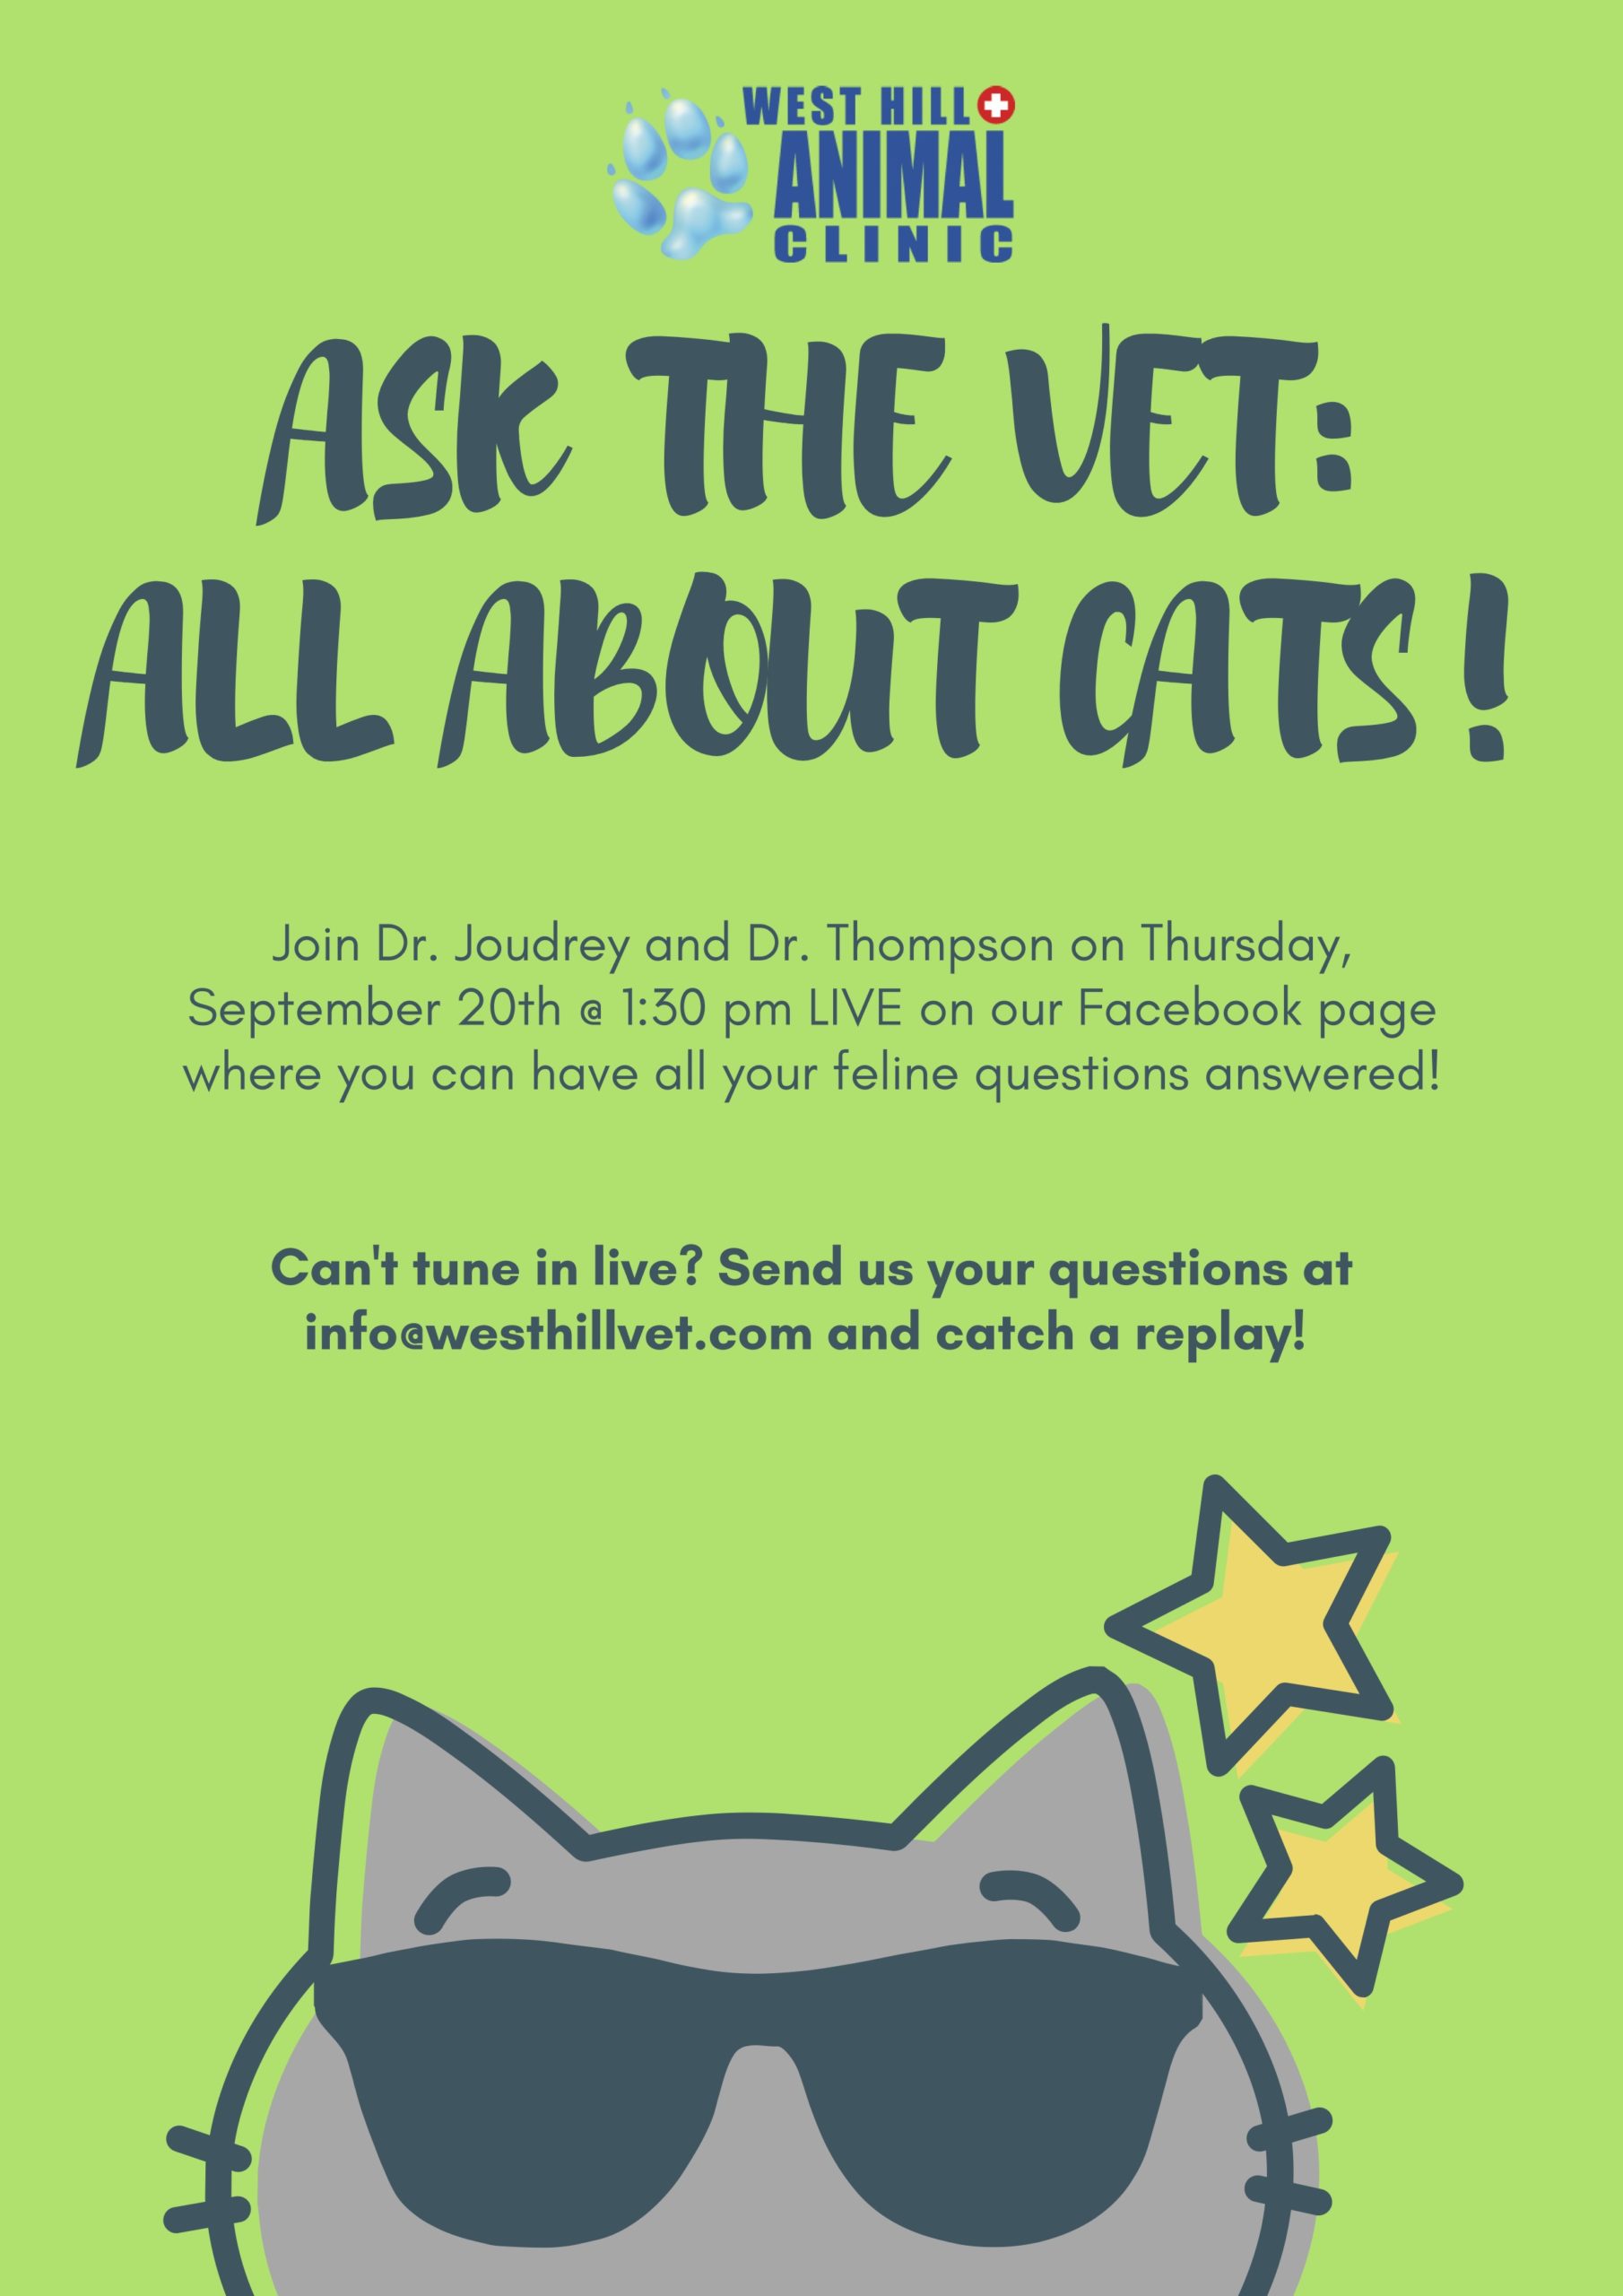 Ask the vet